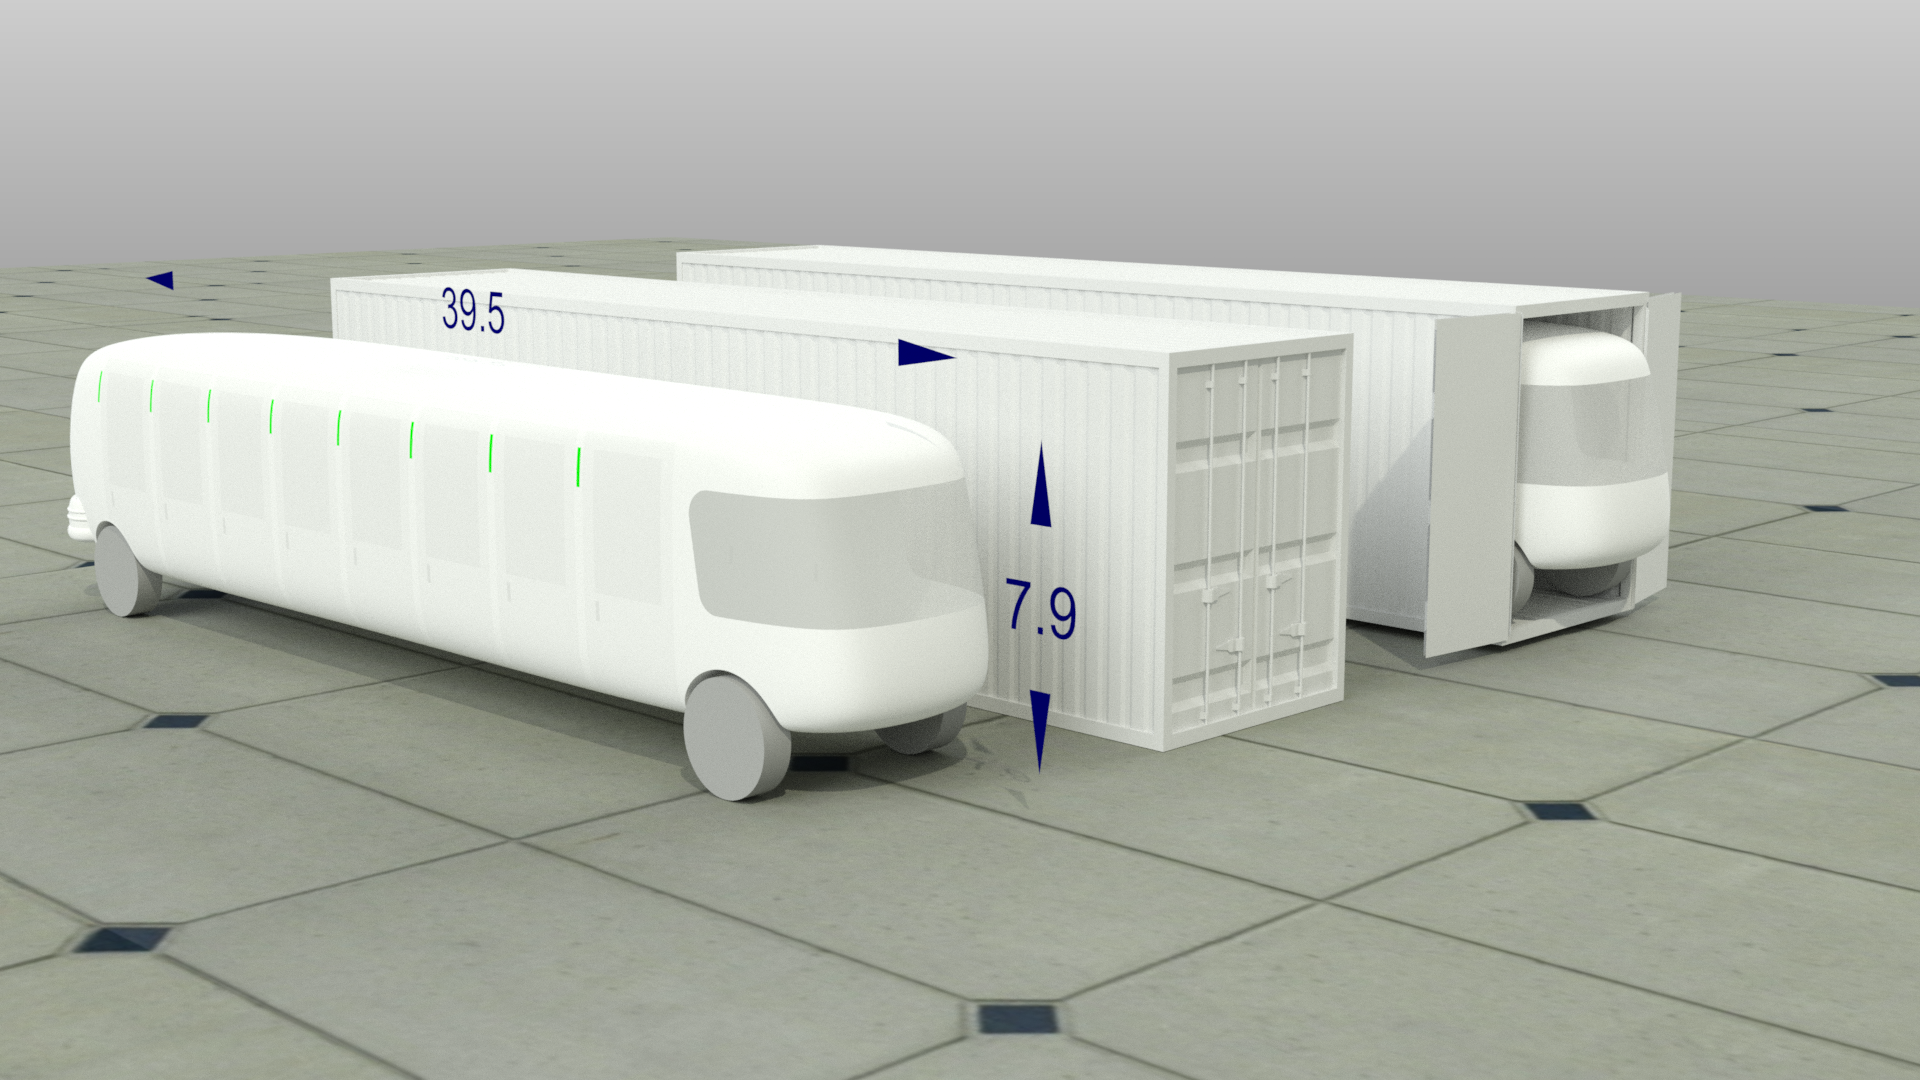 Chaser Bus - Increase Value and Reduce Shipping Costs